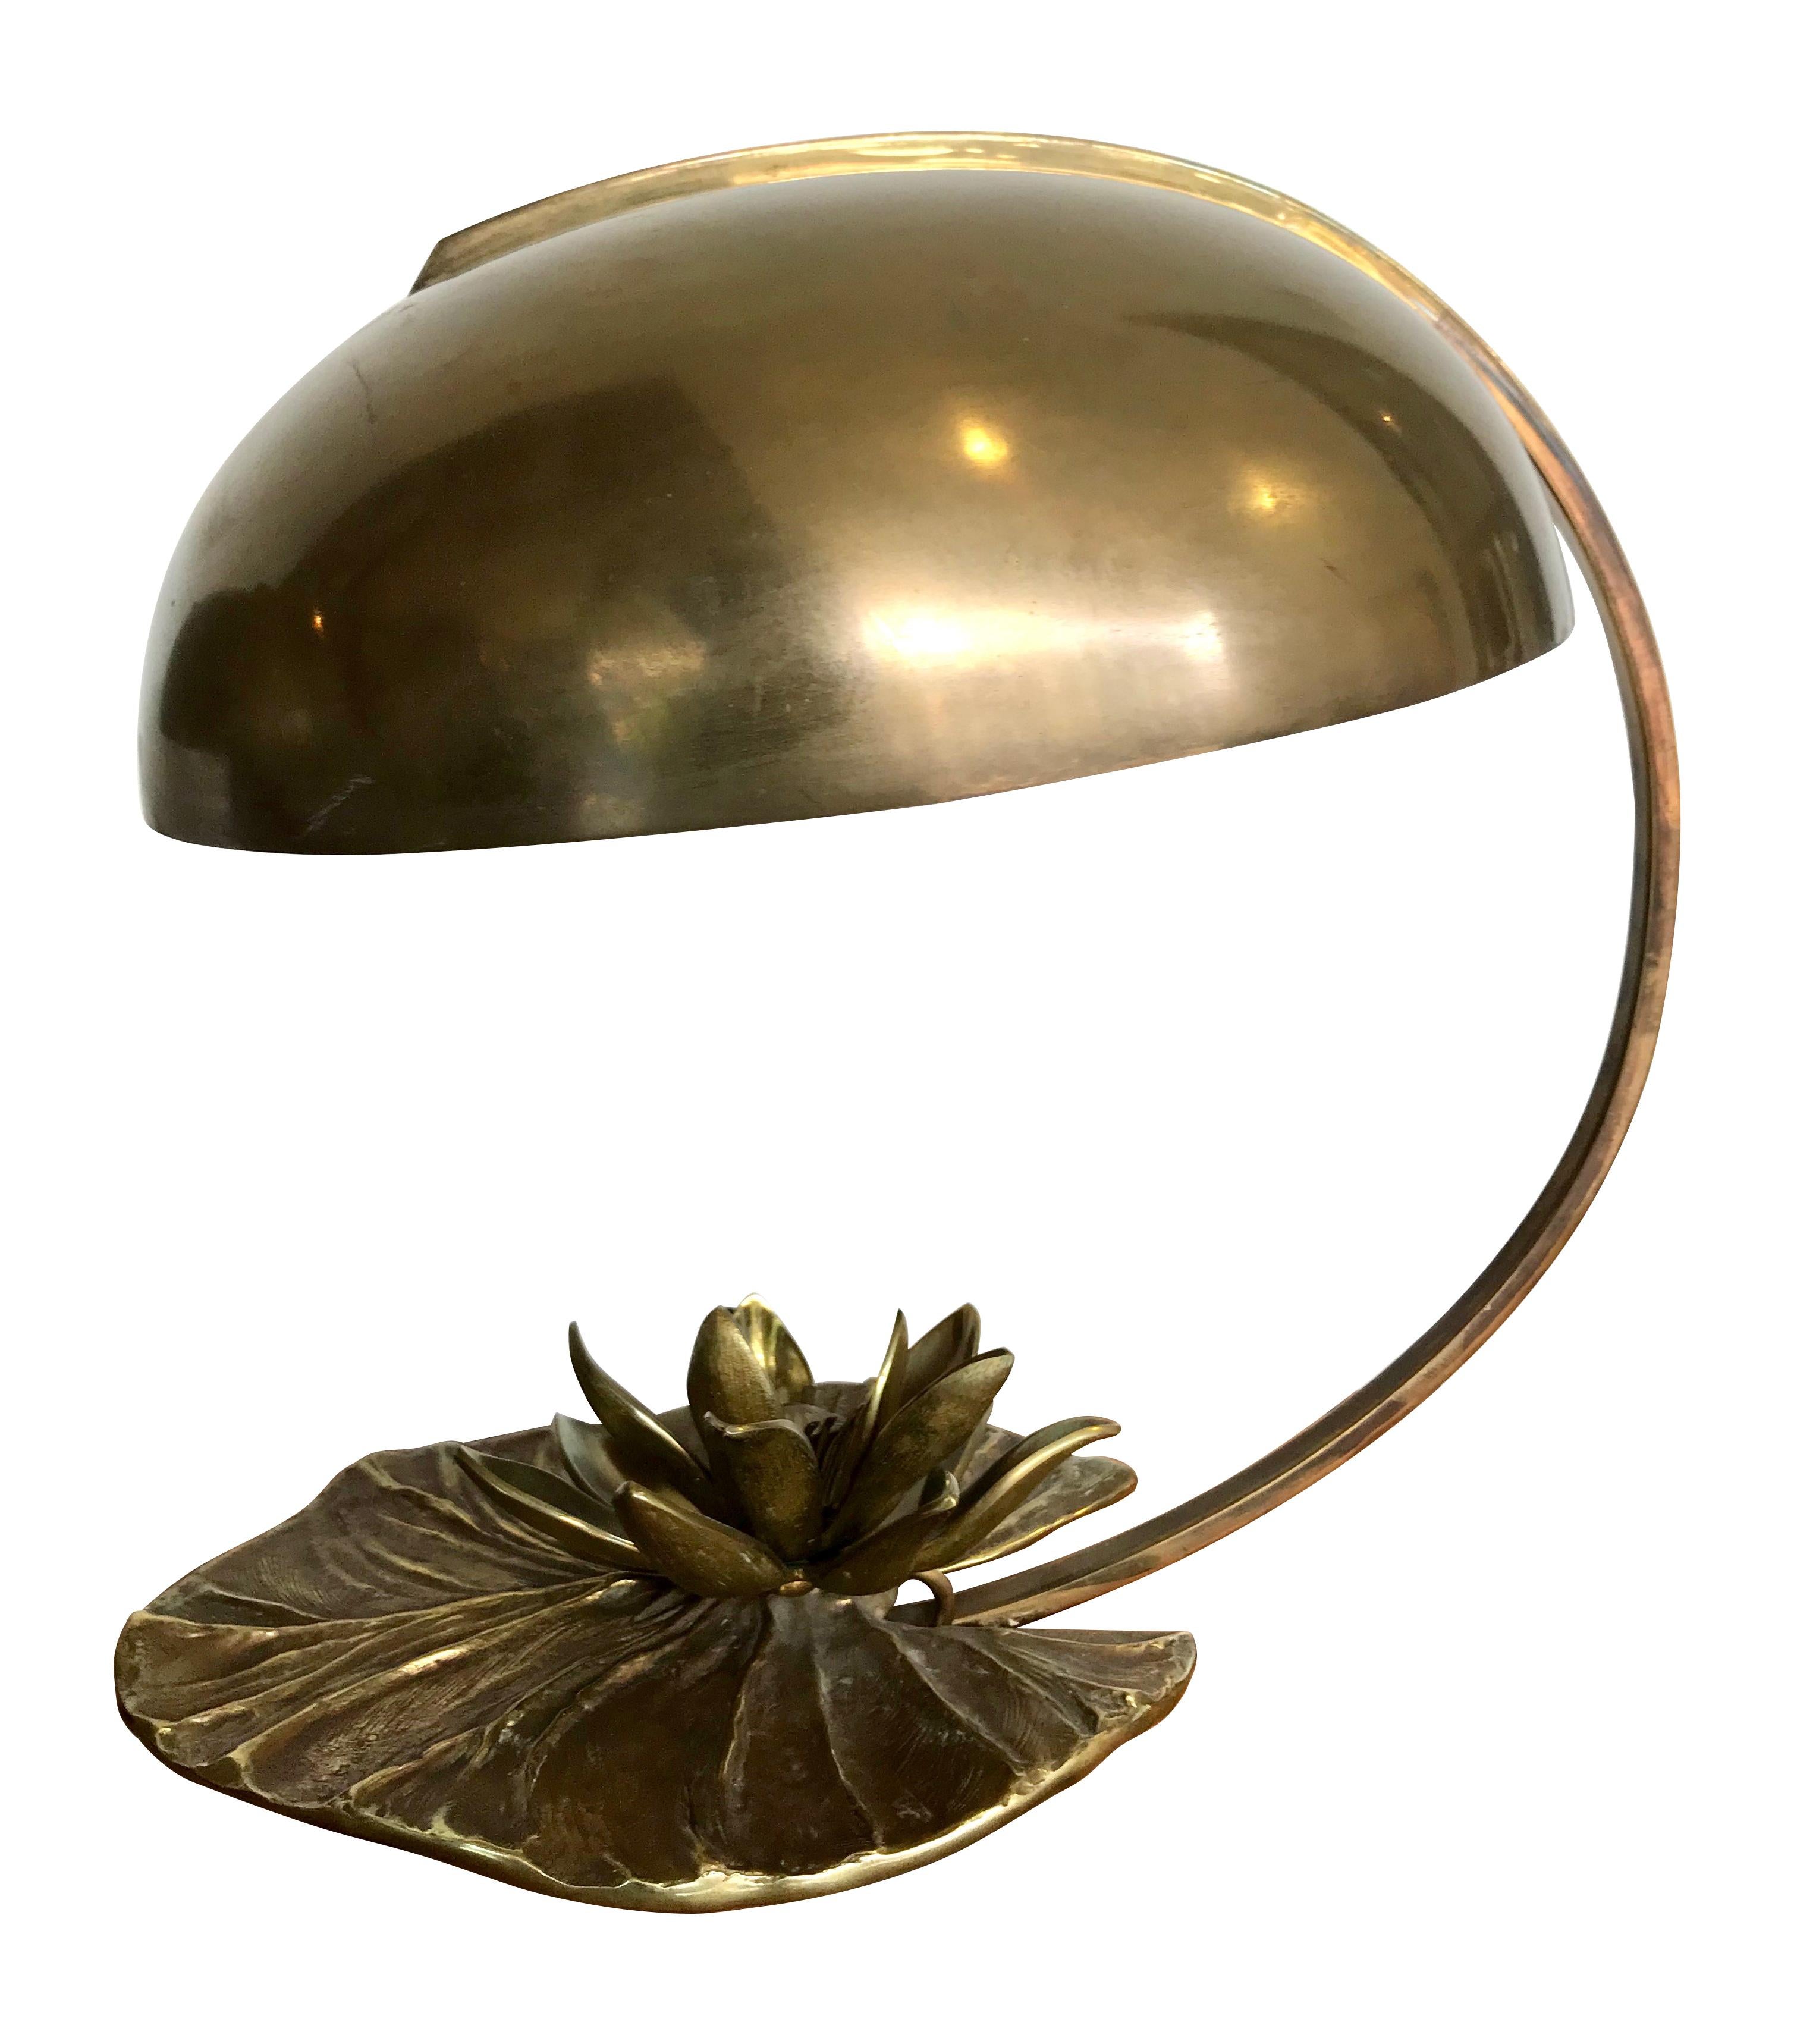 A Maison Charles “Nenuphar” bronze lamp designed and signed twice in the mould by Chrystiane Charles on the top and bottom of the lily pad leaf. She designed and made all the orignal clay moulds herself and only the earlier ones have the signature